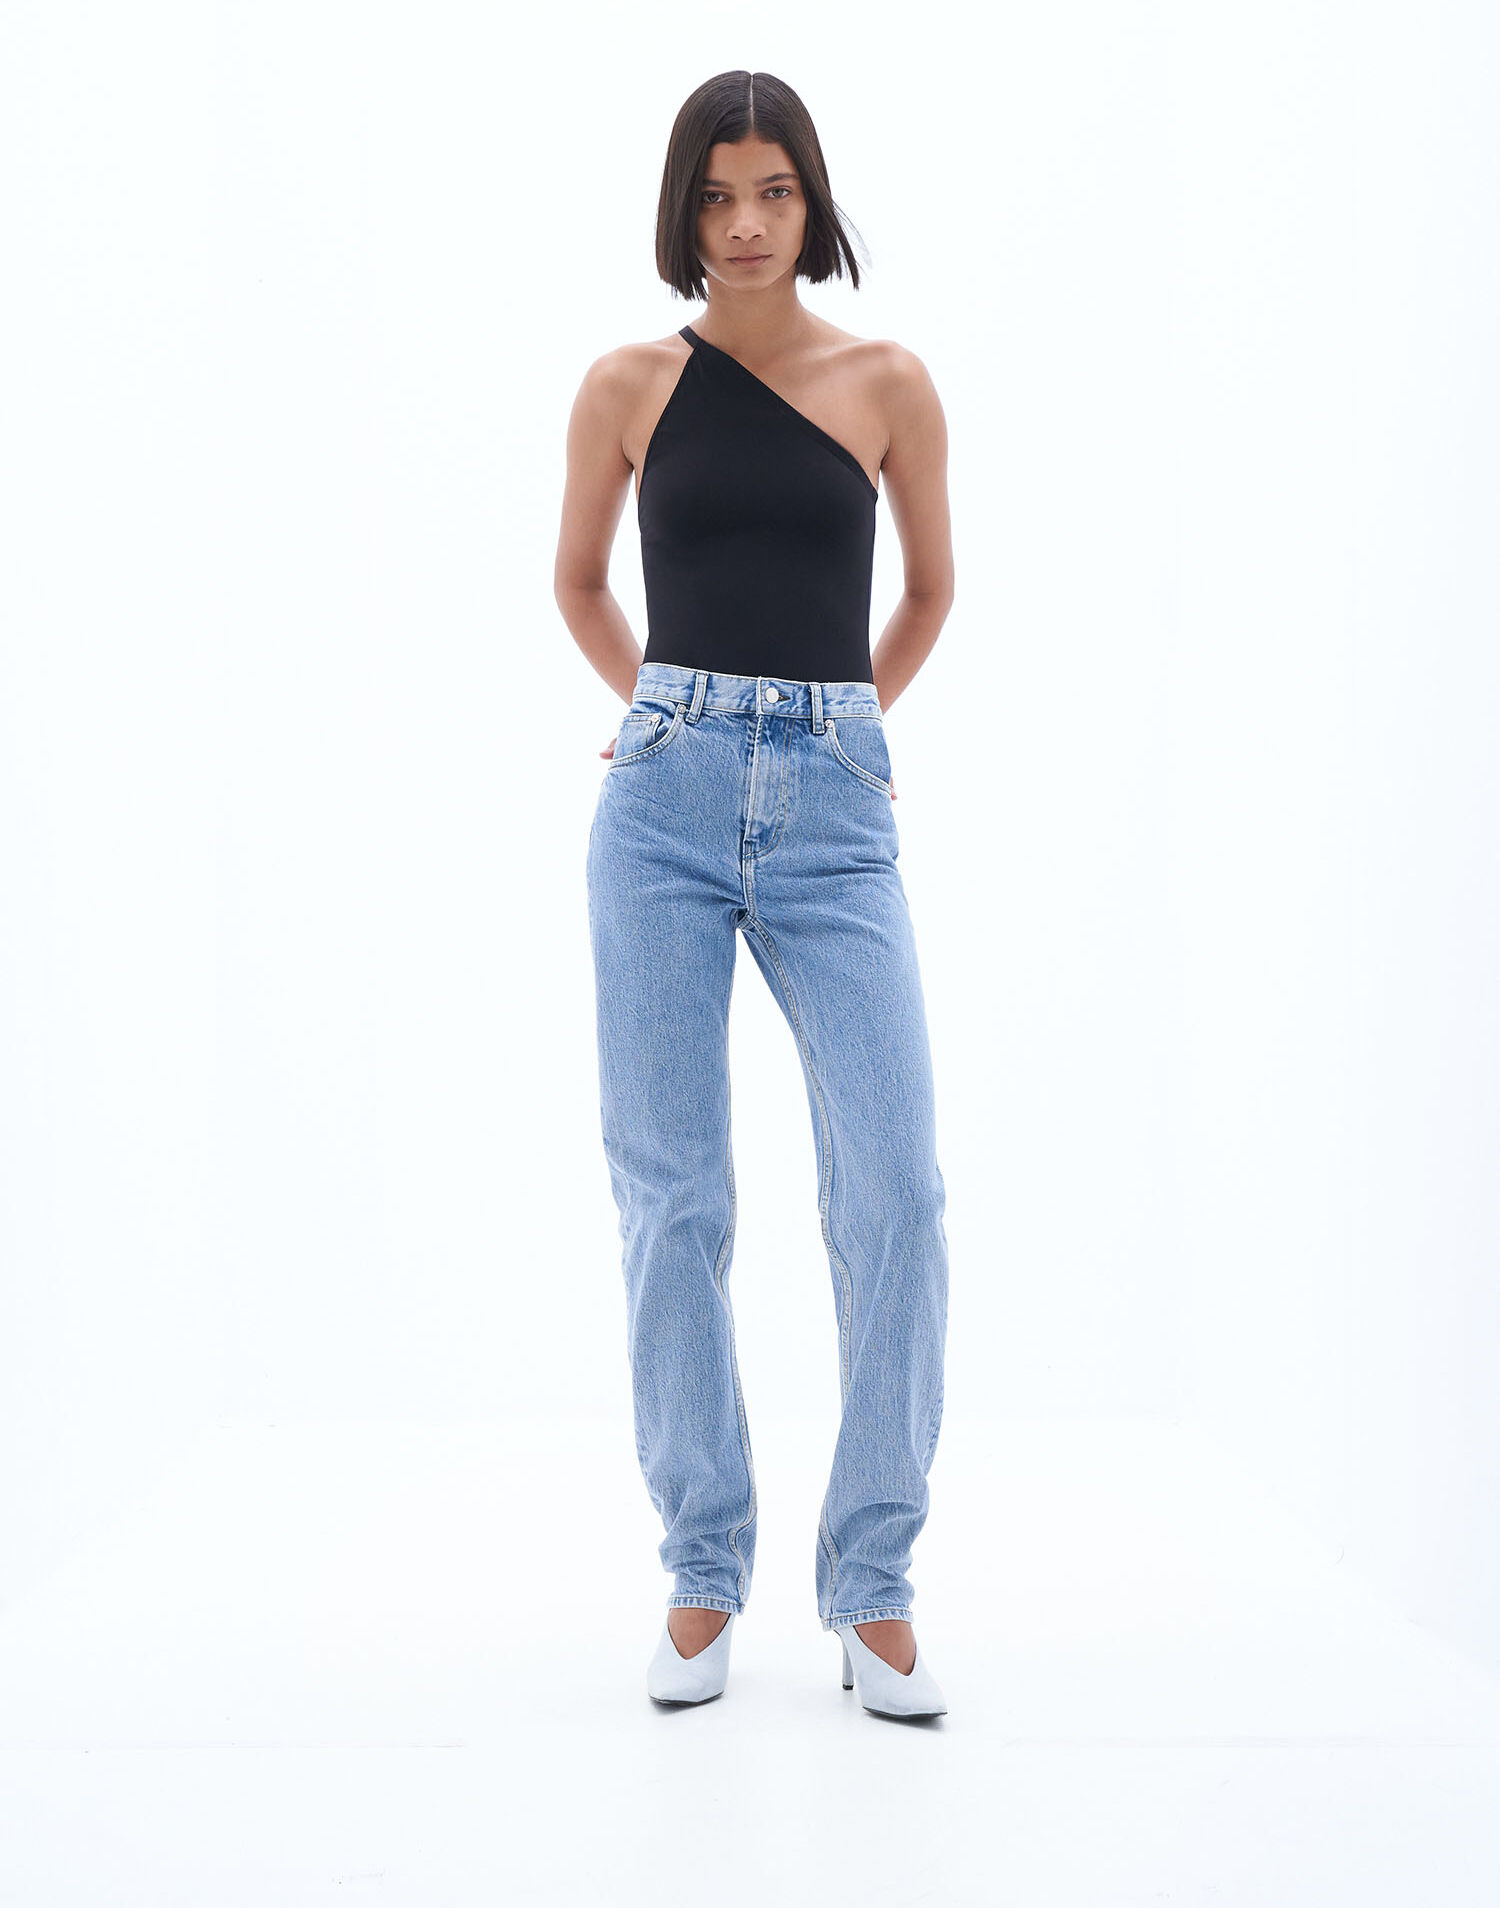 Jeans in Tapered-Passform